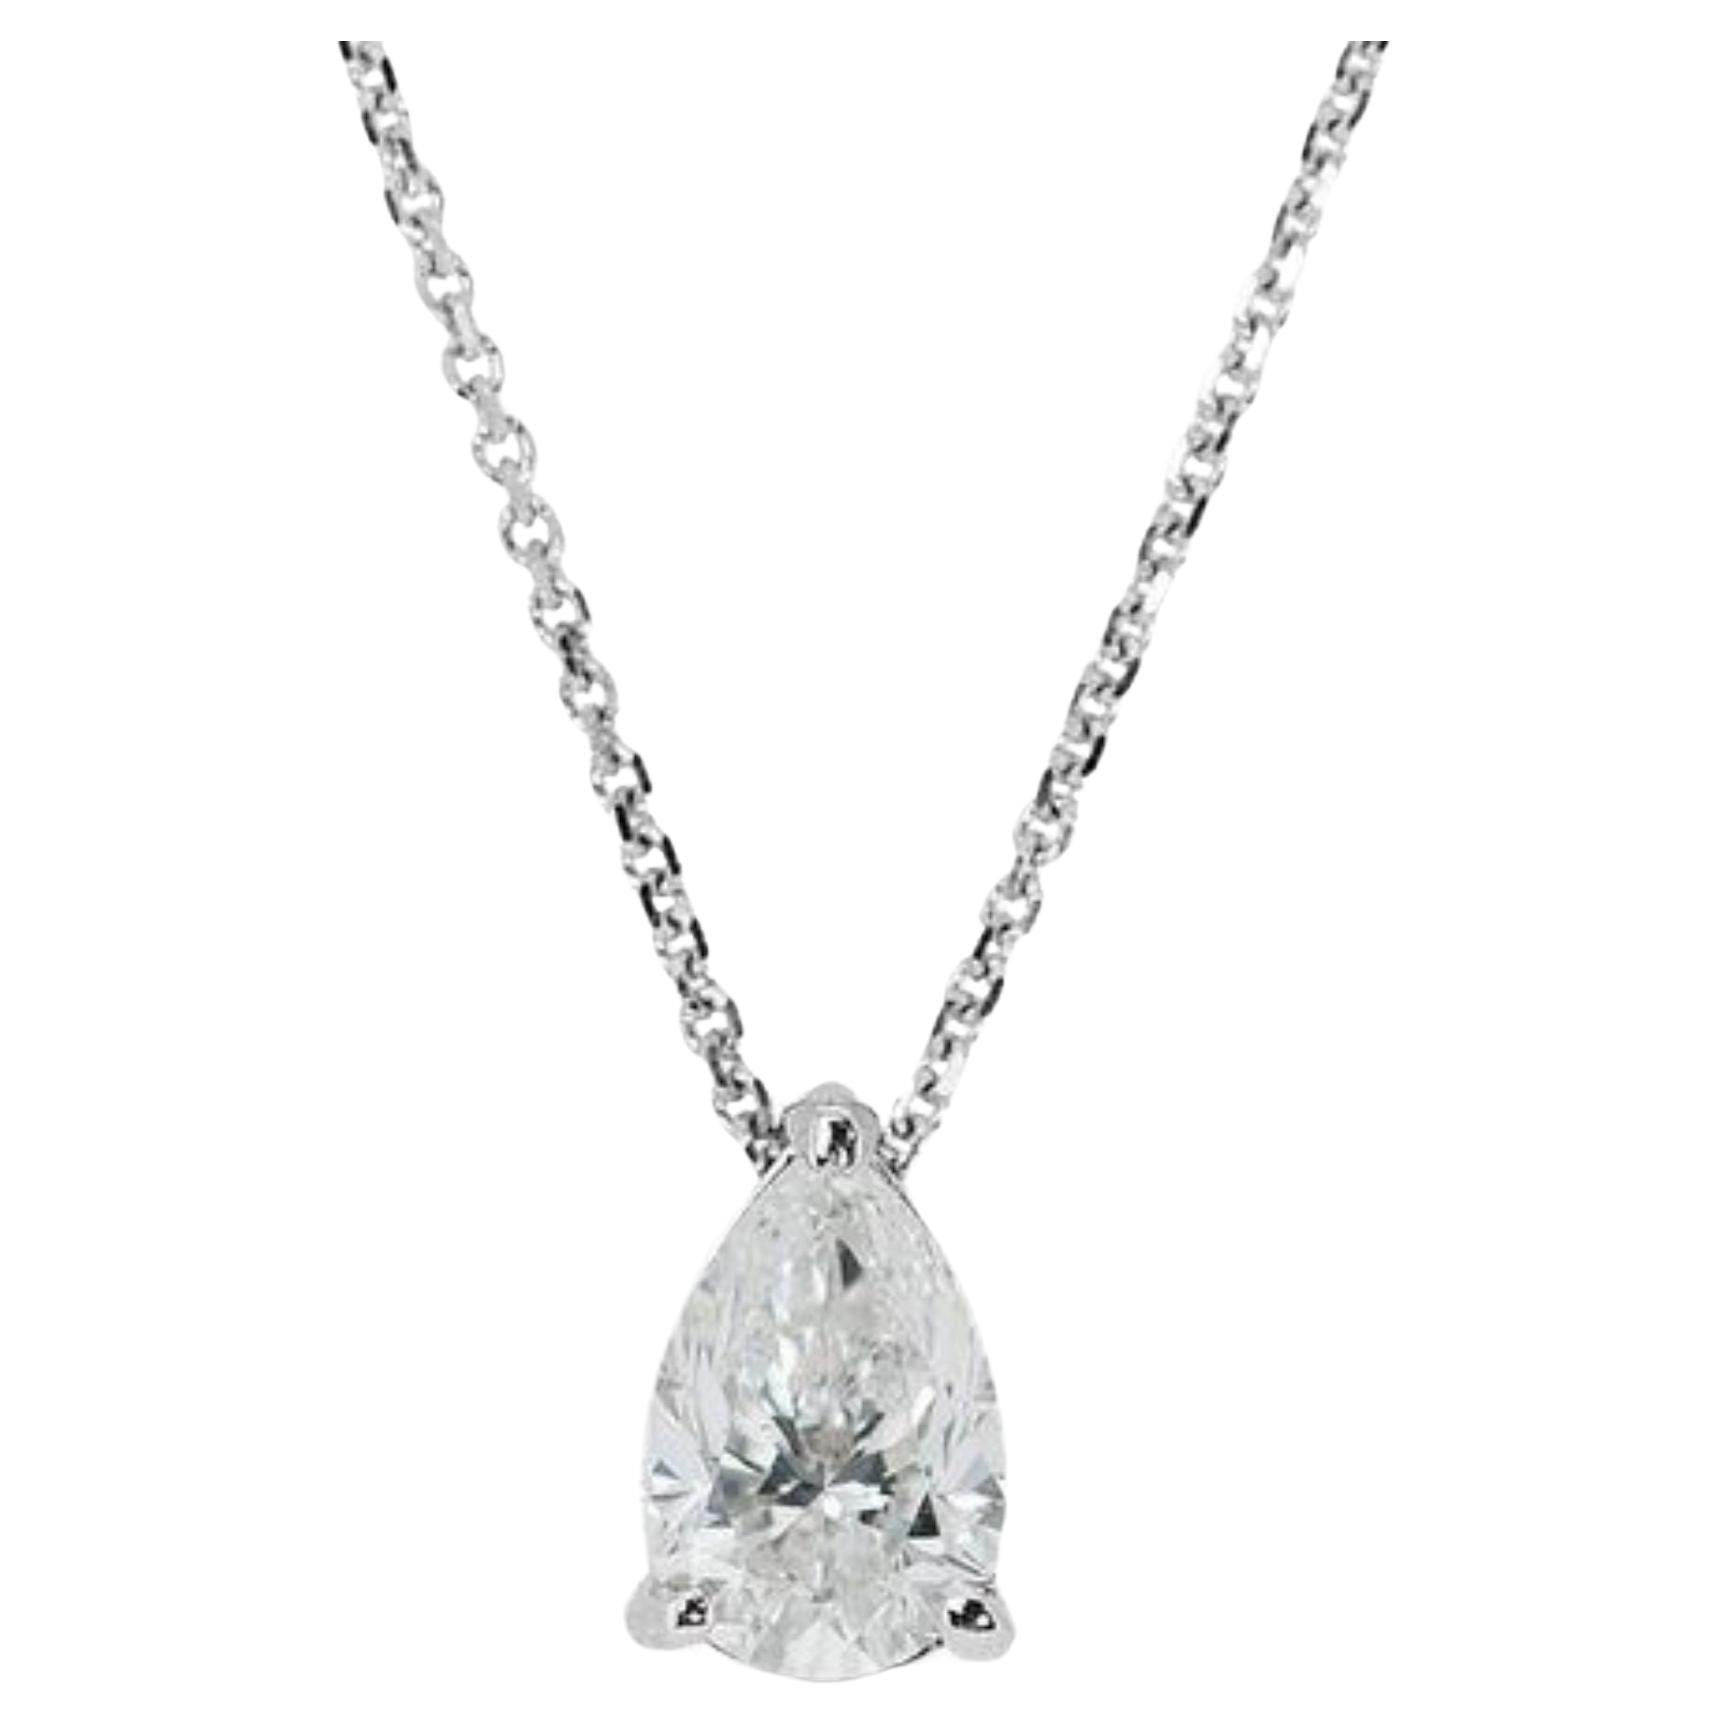 Shimmering 0.70ct Pear Brilliant Diamond Necklace in 18K White Gold